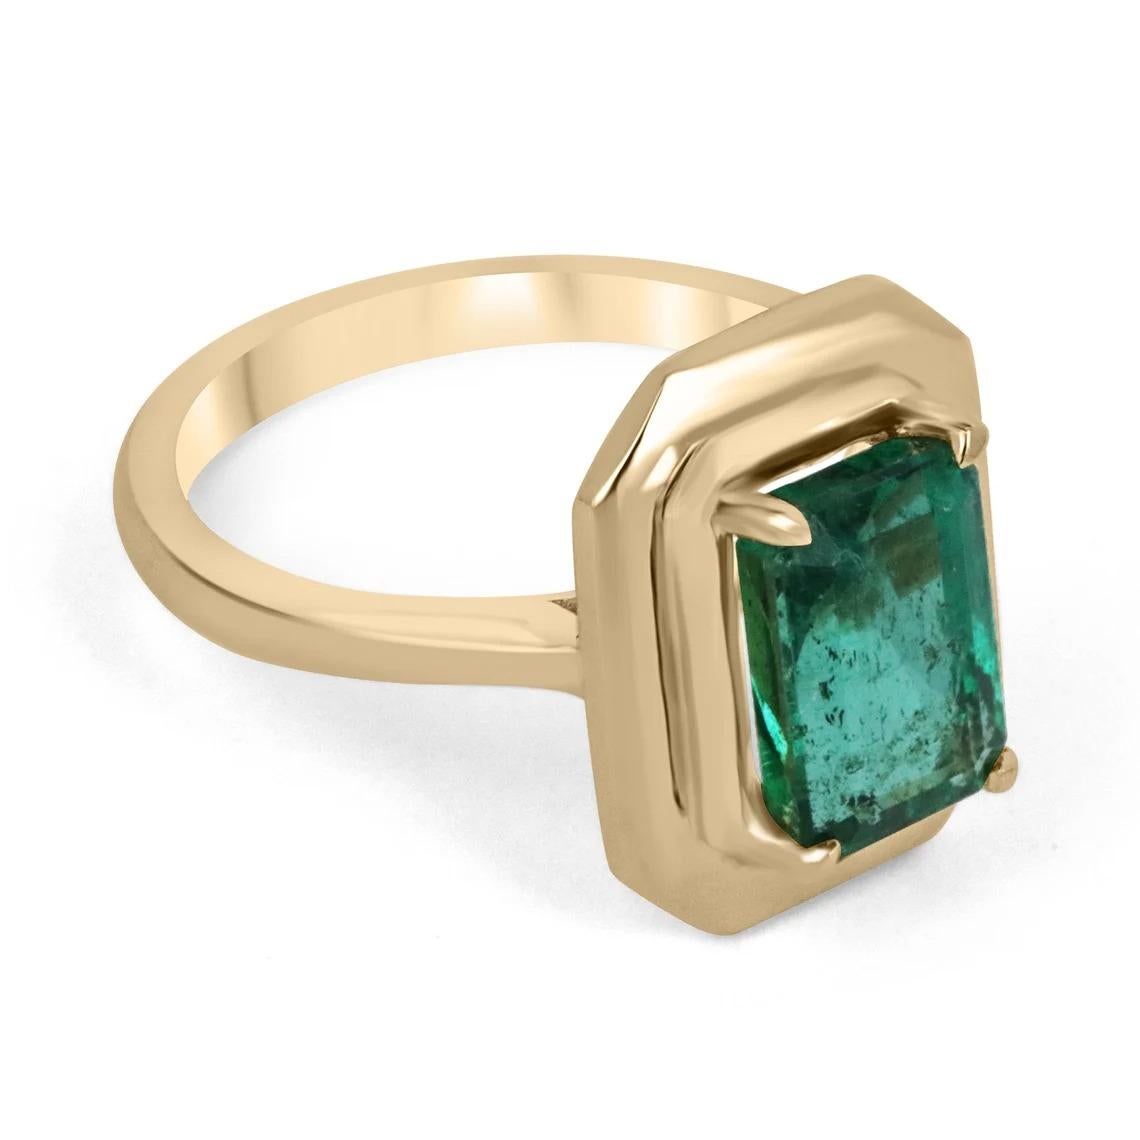 Displayed is a classic emerald solitaire engagement or right-hand ring. This spectacular piece features a 2.77-carat, natural emerald cut emerald from the origins of Zambia. The center stone showcases a vivacious deep dark green color that enthralls